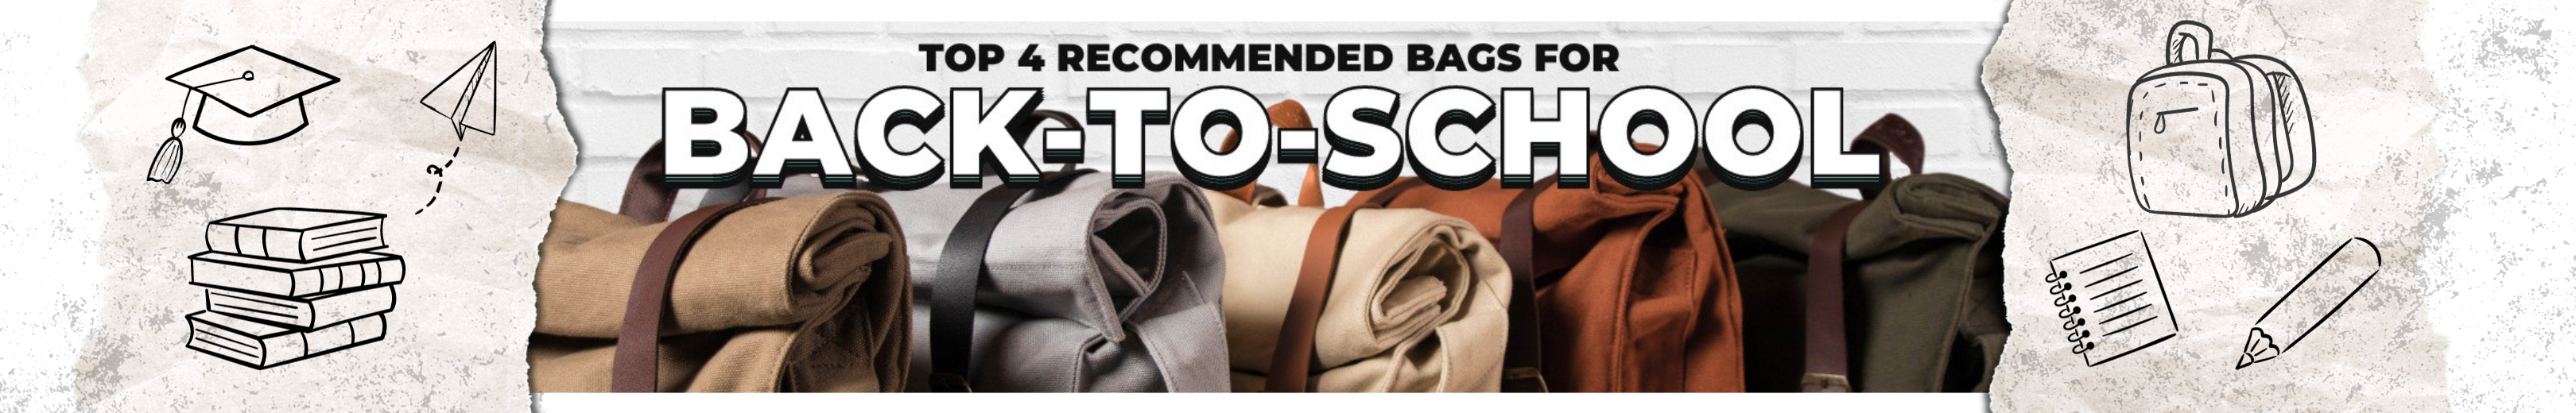 Top 4 Recommended Bags for Back-To-School